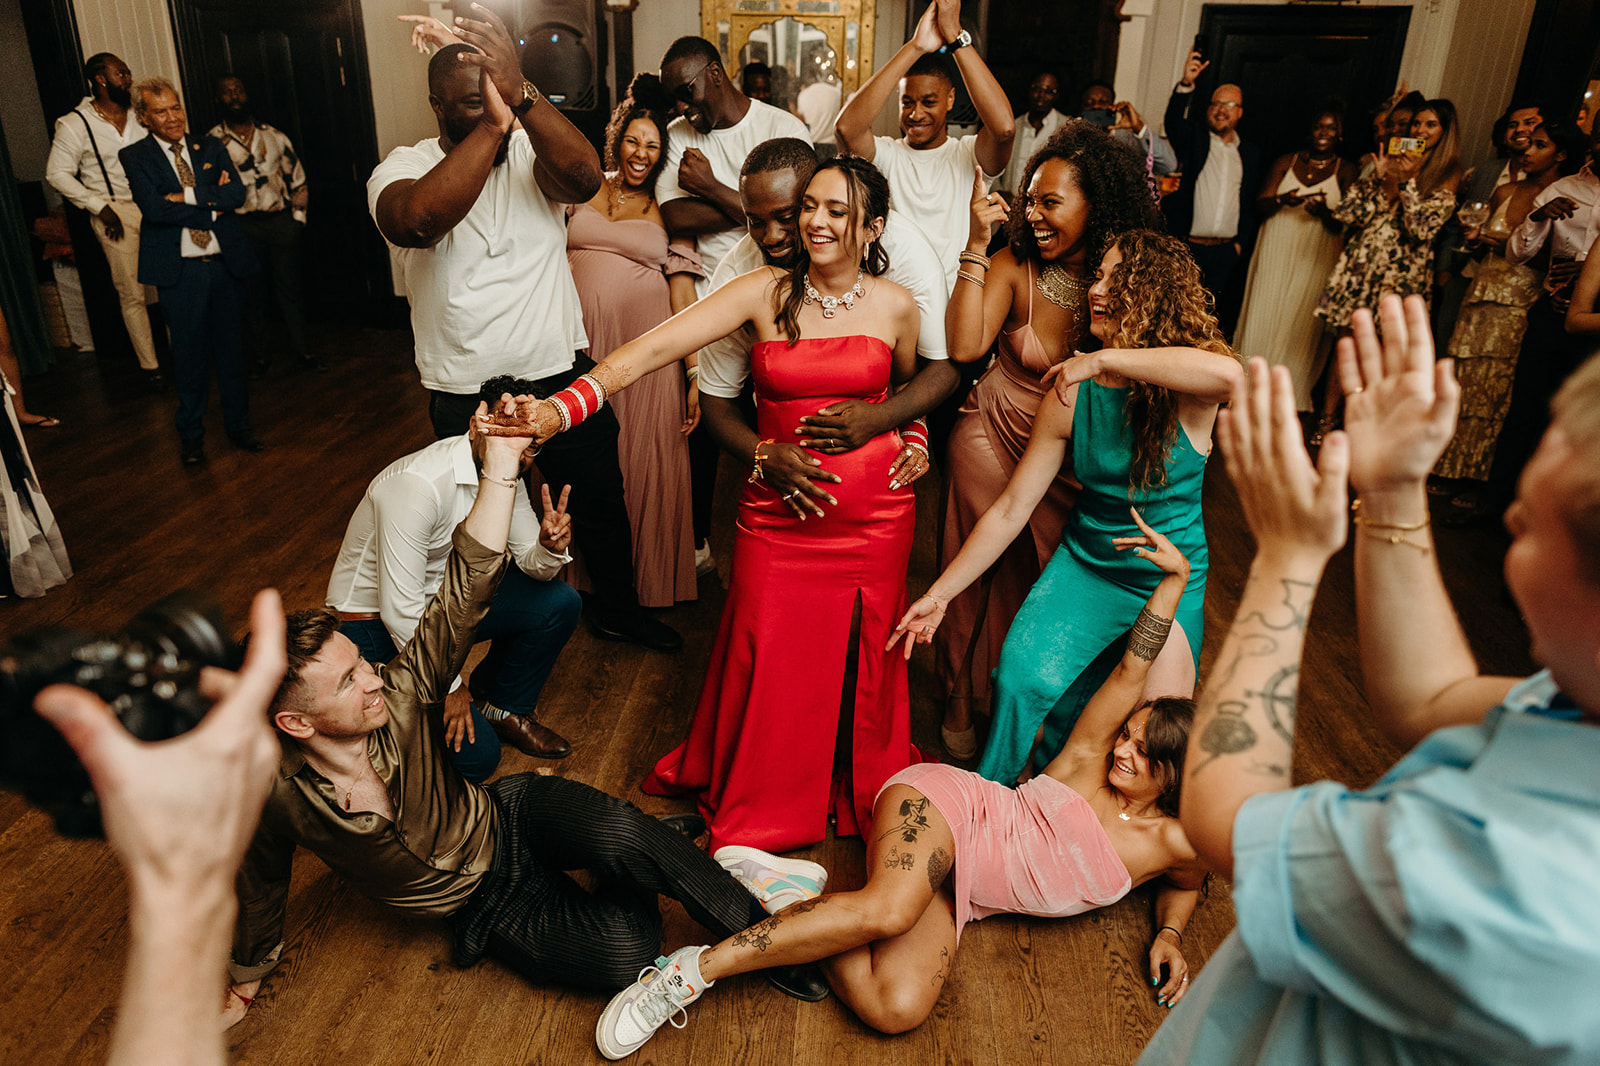 Unobtrusive shot of an exuberant group dancing at a party, highlighting a woman in a red dress with a radiant smile.